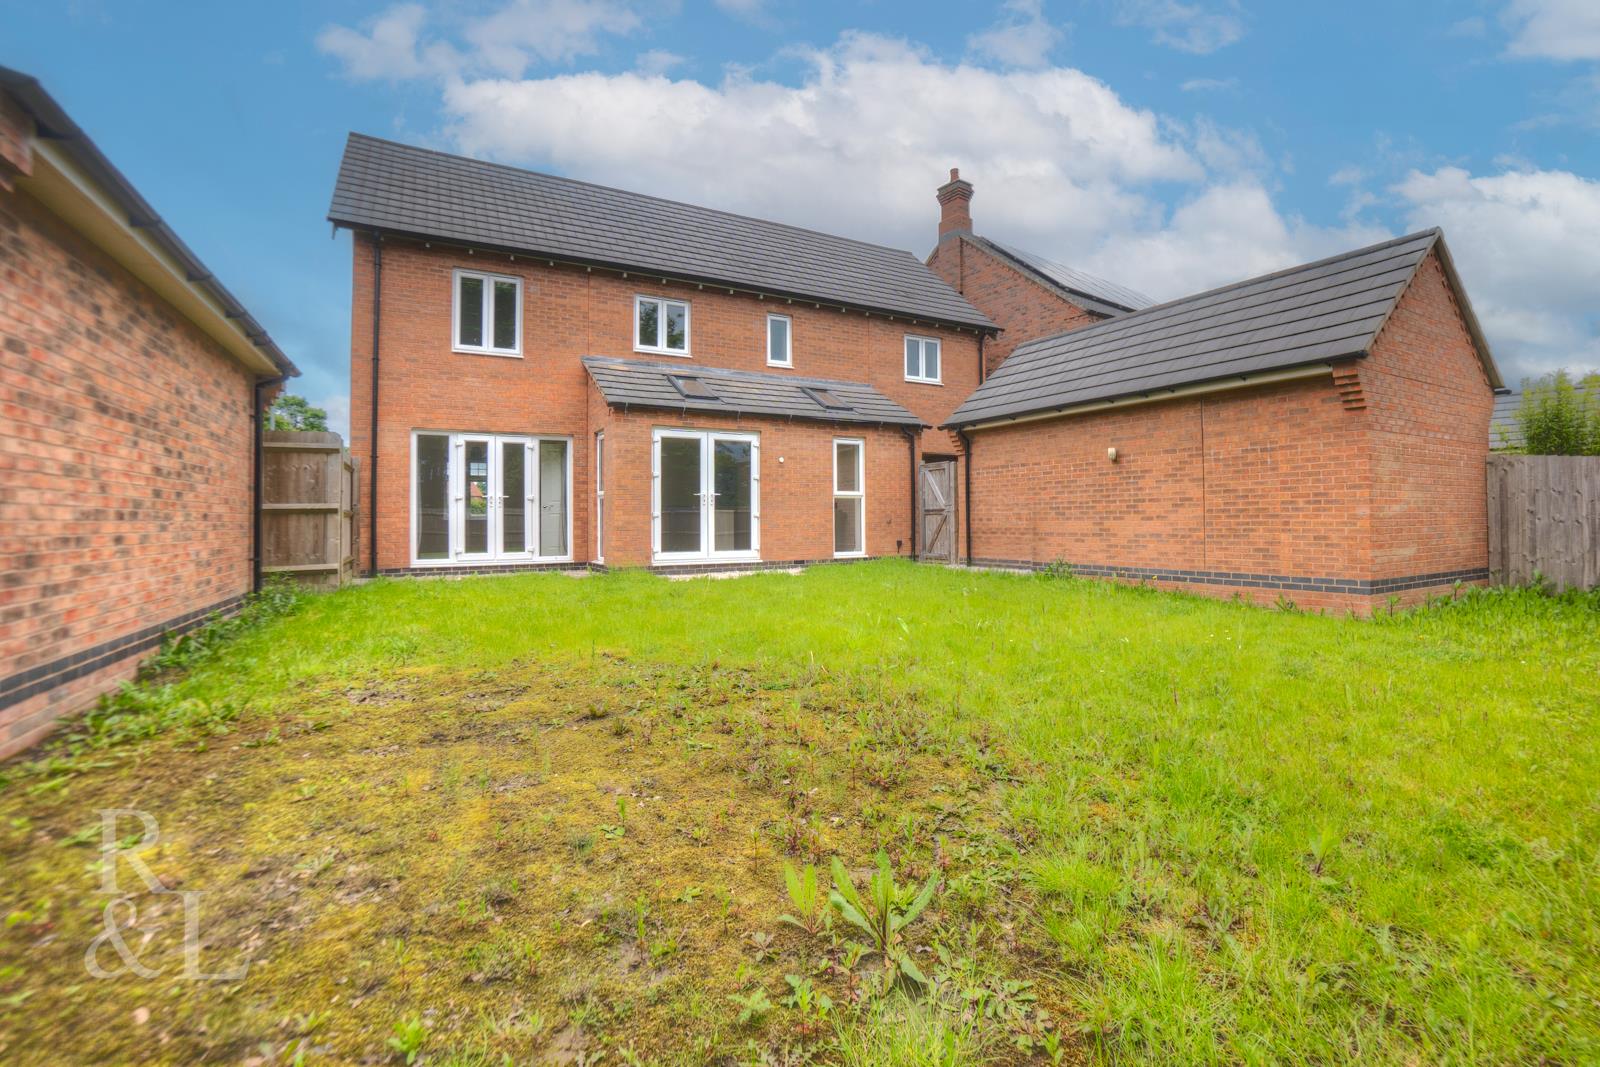 Property image for Pickering Drive, Blackfordby